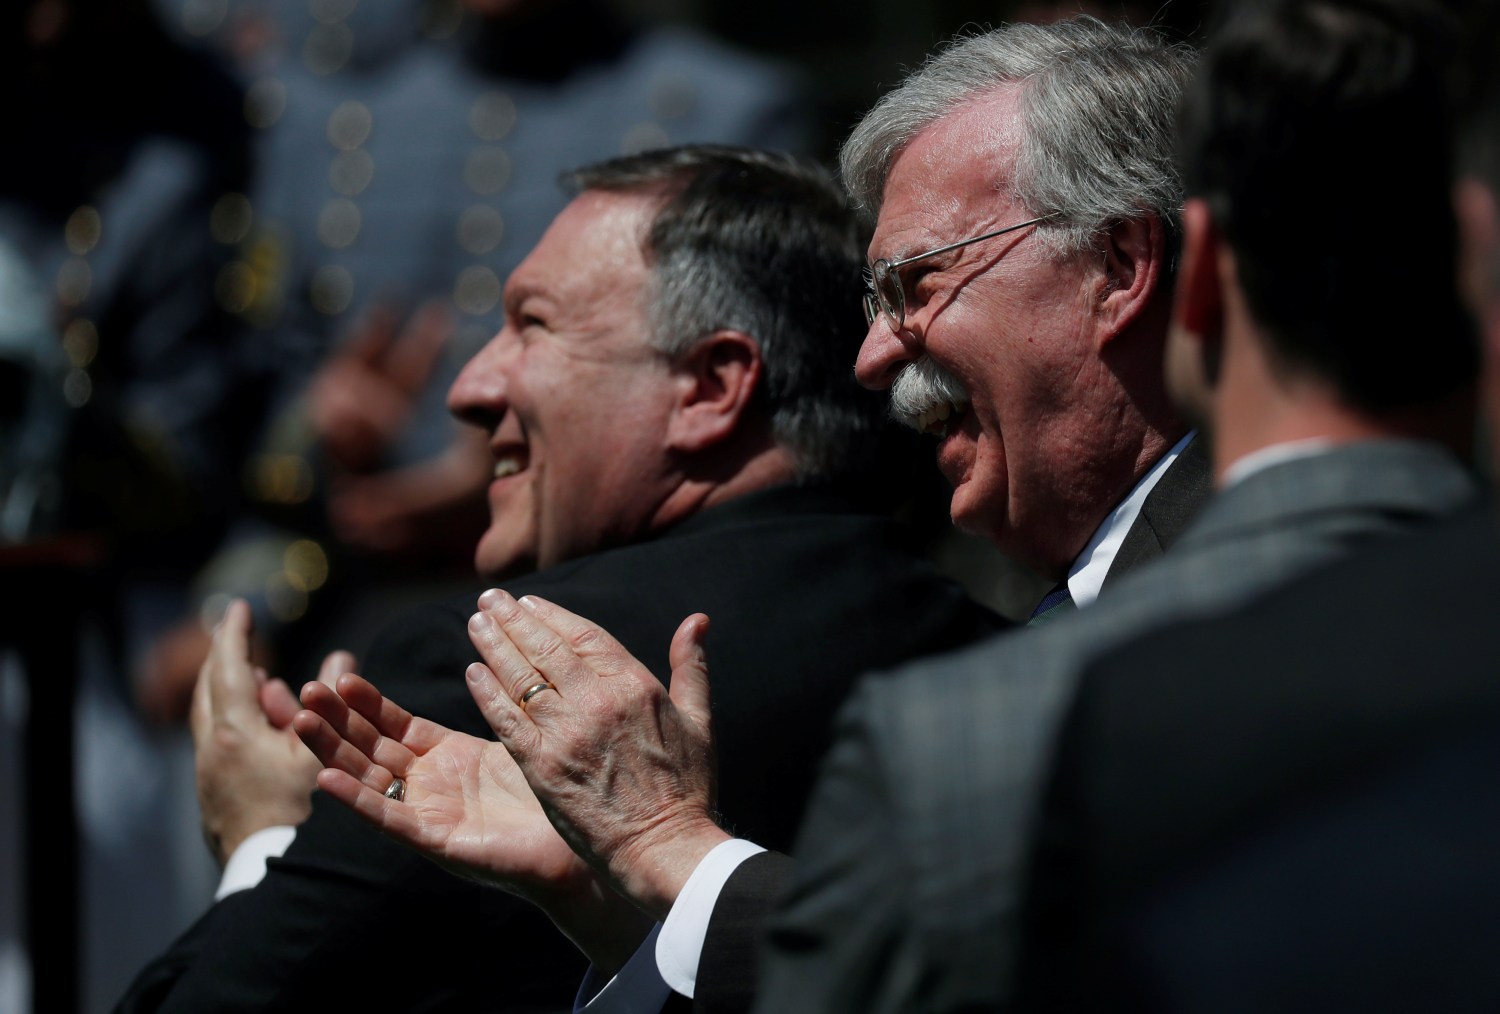 U.S. Secretary of State Mike Pompeo and National Security Advisor John Bolton applaud as President Donald Trump presents the Commander-in-Chief's Trophy to the U.S. Military Academy football team in the Rose Garden at the White House in Washington, U.S., May 1, 2018. REUTERS/Leah Millis - RC1DAD60CB00